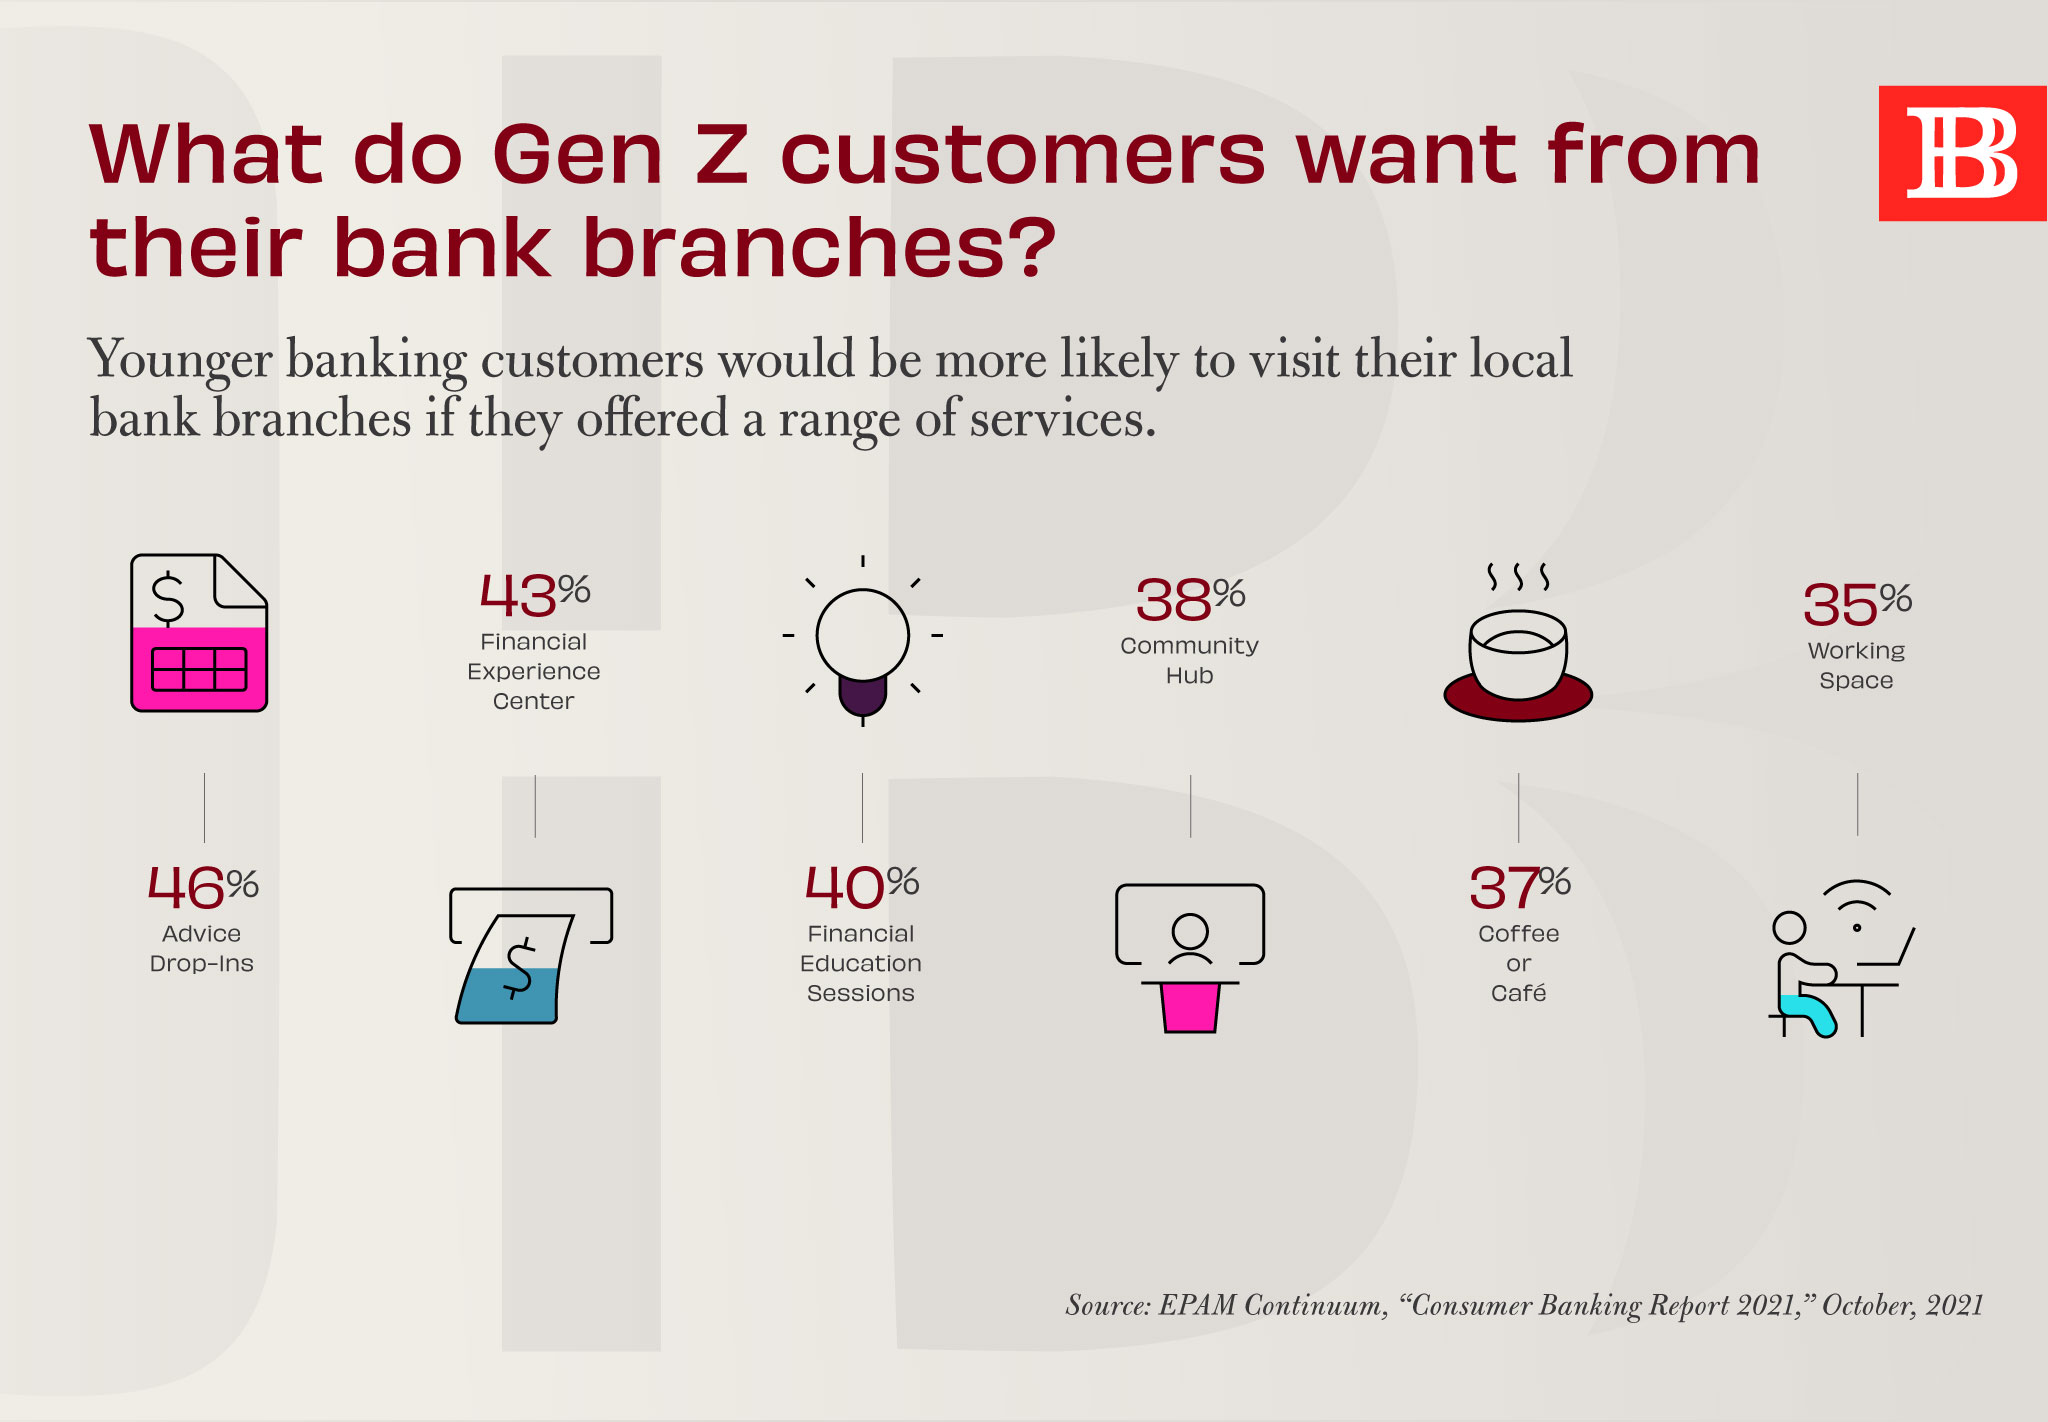 What do Gen Z customers want from their bank branches?